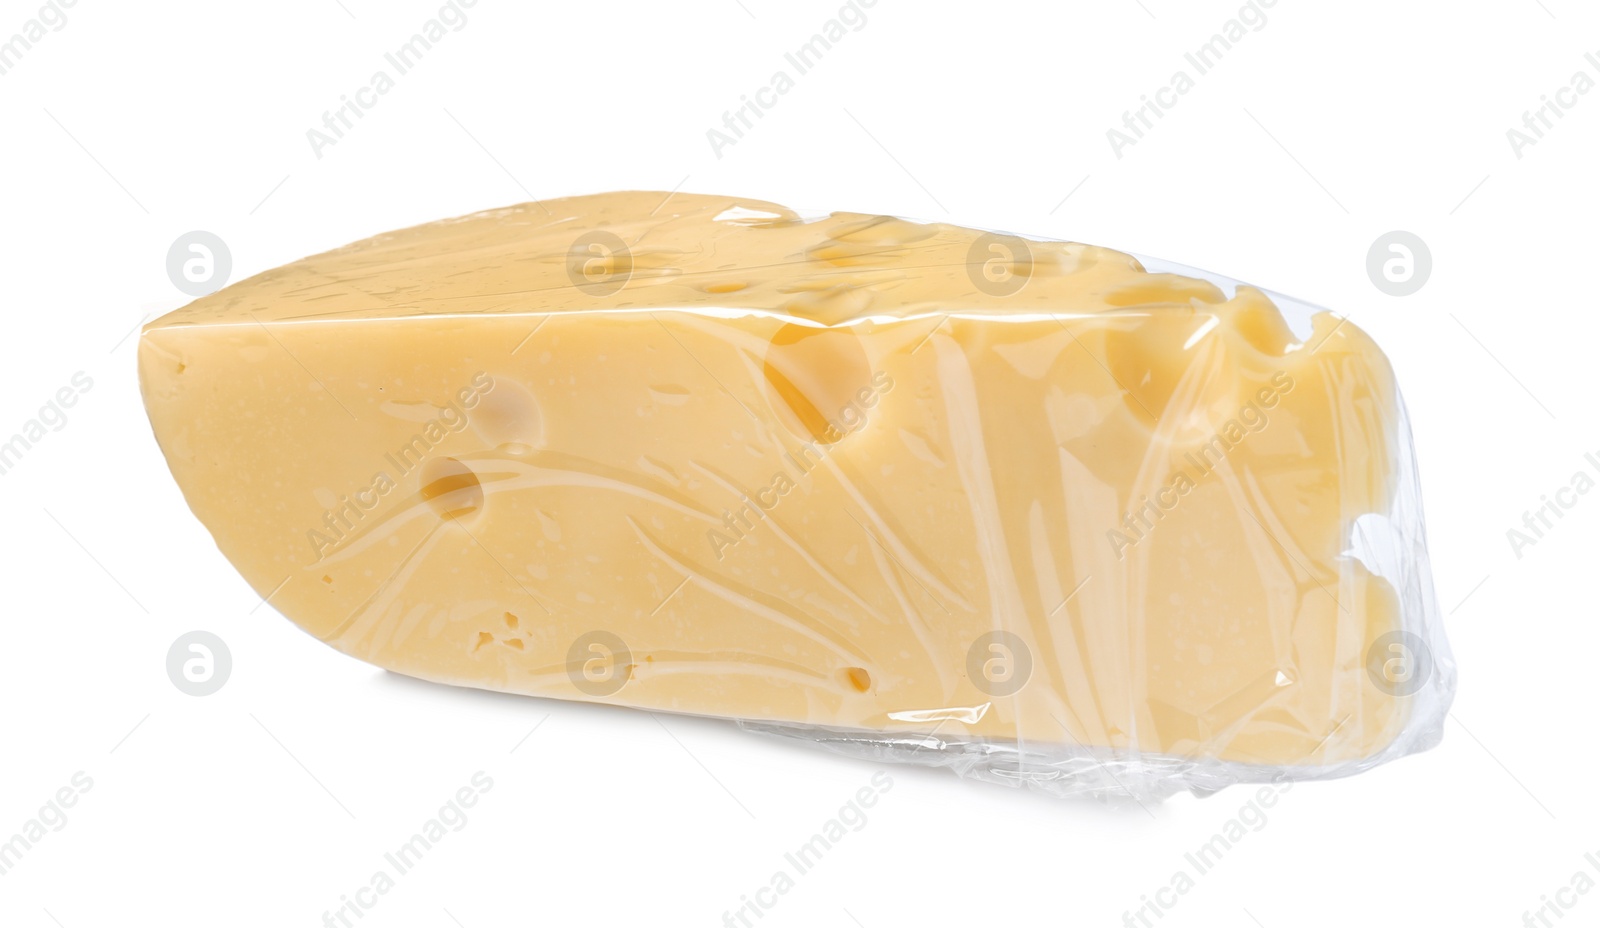 Photo of Cheese wrapped with transparent plastic stretch film isolated on white